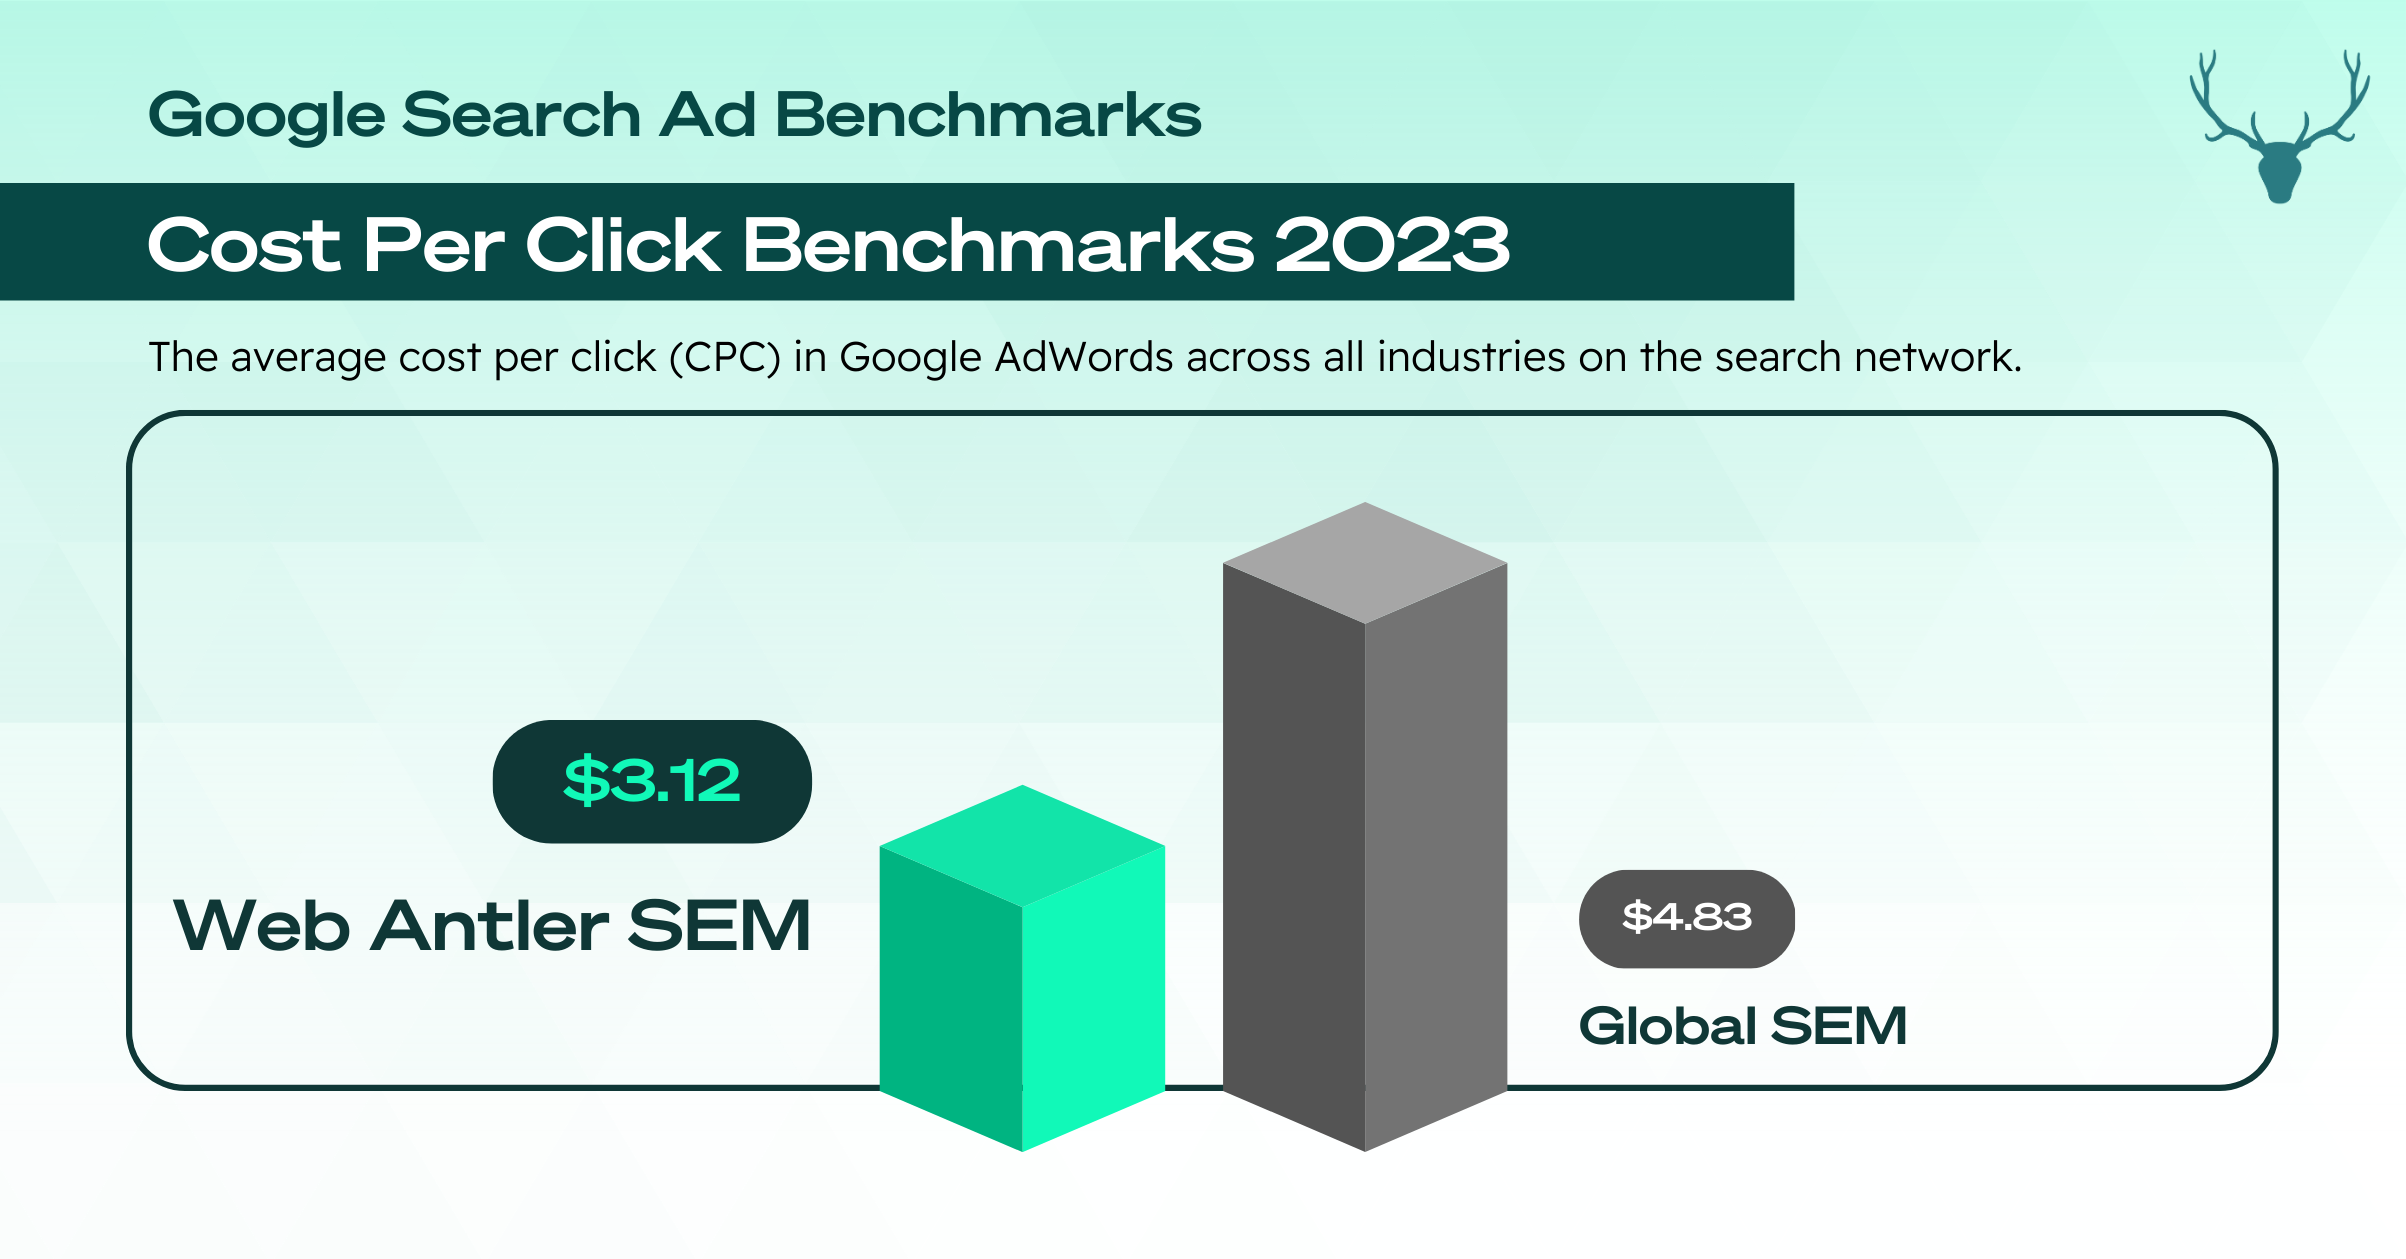 Google Search Ad Benchmarks Cost Per Click New Zealand 2023